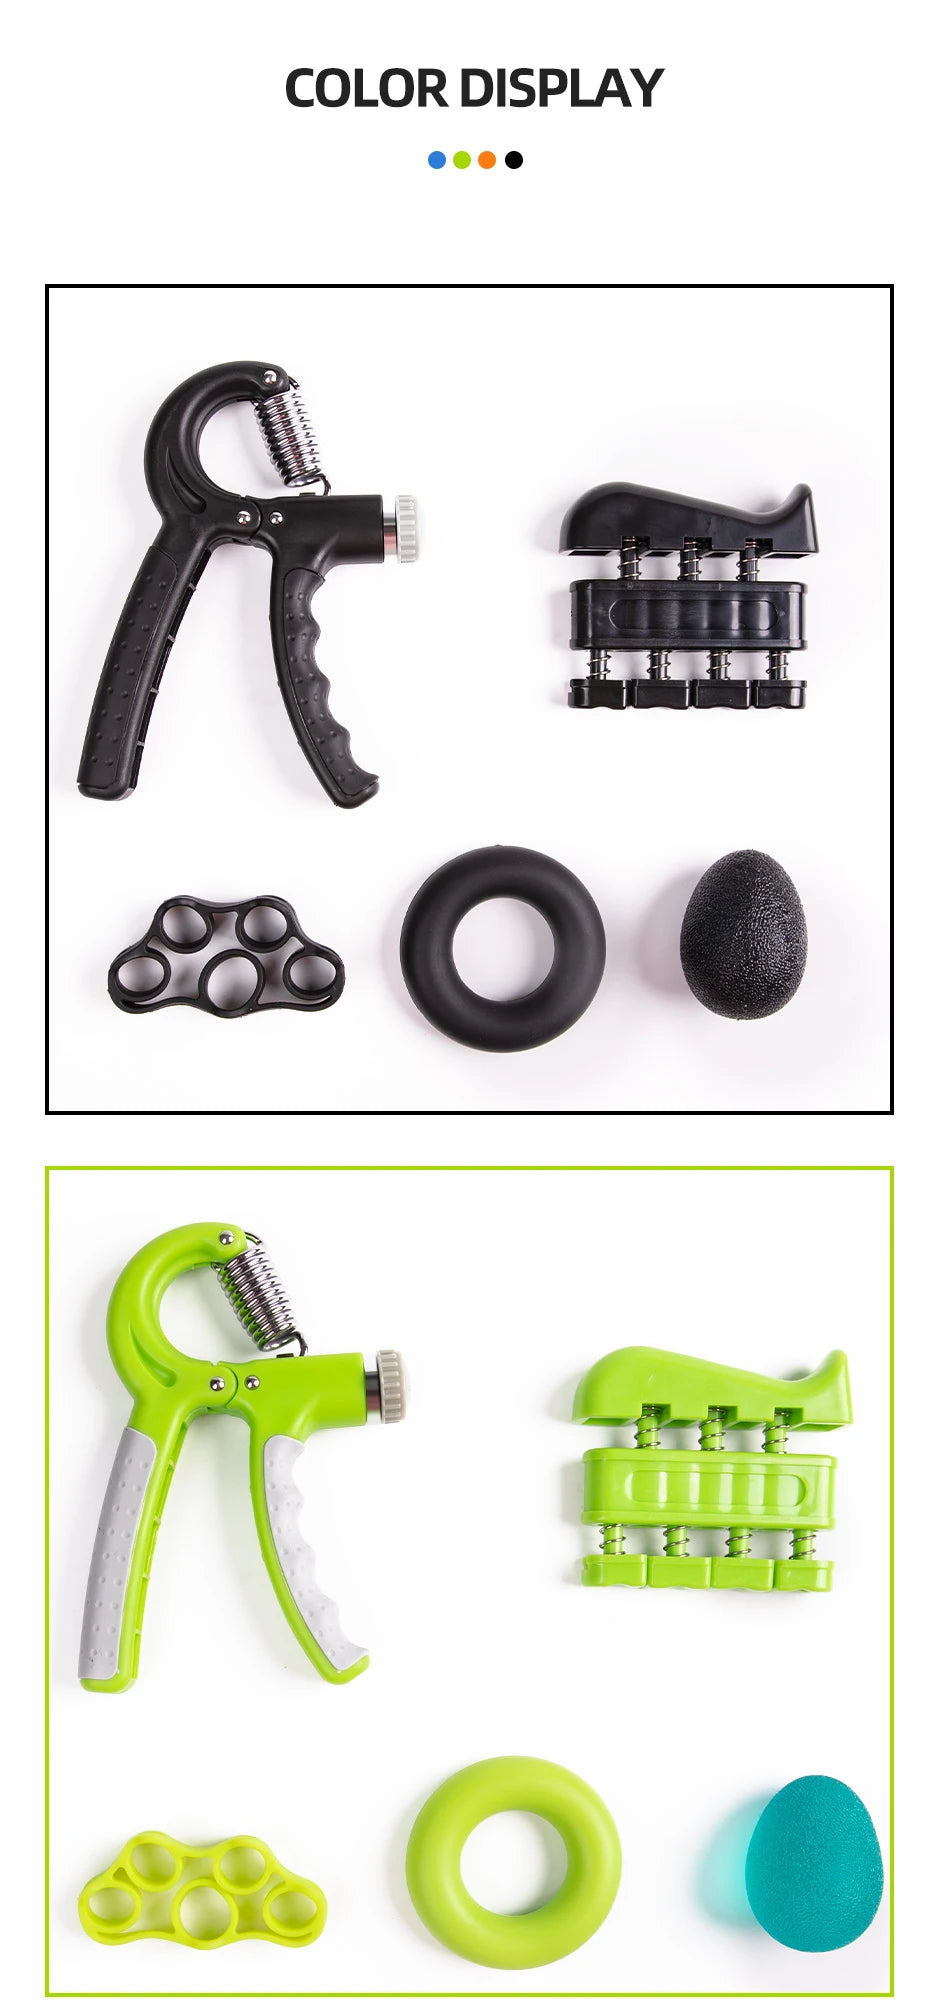 A set of different types of exercise equipment, including a JB Muscle™ Hand Gripper: Dynamic Arm Strength Trainer.